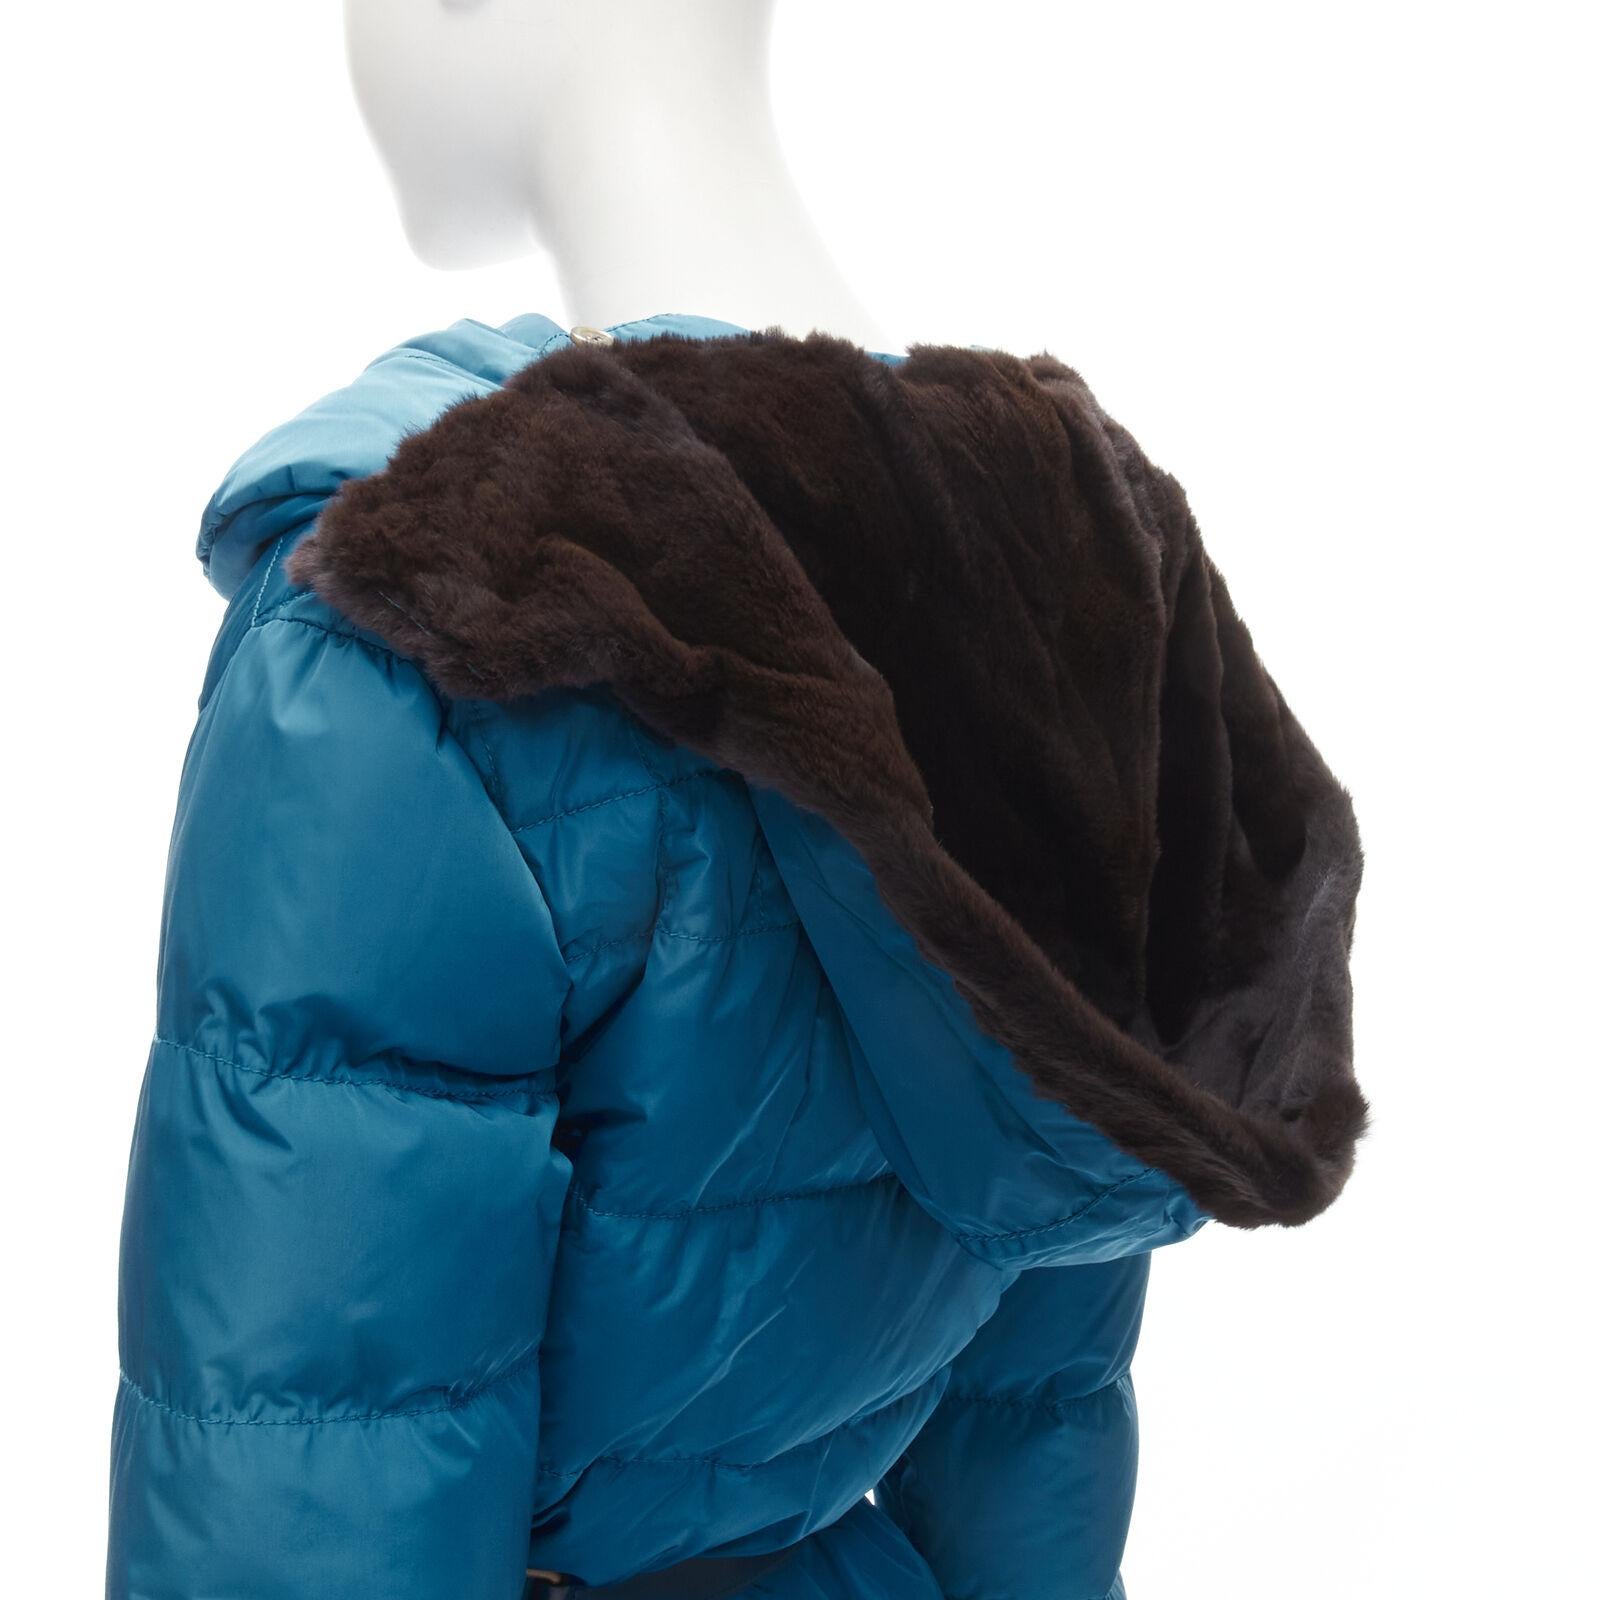 LOUIS VUITTON blue Real Goose down fur lined hood belted puffer jacket FR34 XS
Reference: ANWU/A00763
Brand: Louis Vuitton
Designer: Marc Jacobs
Material: Nylon
Color: Blue, Brown
Pattern: Solid
Closure: Button
Lining: Down
Extra Details: Concealed